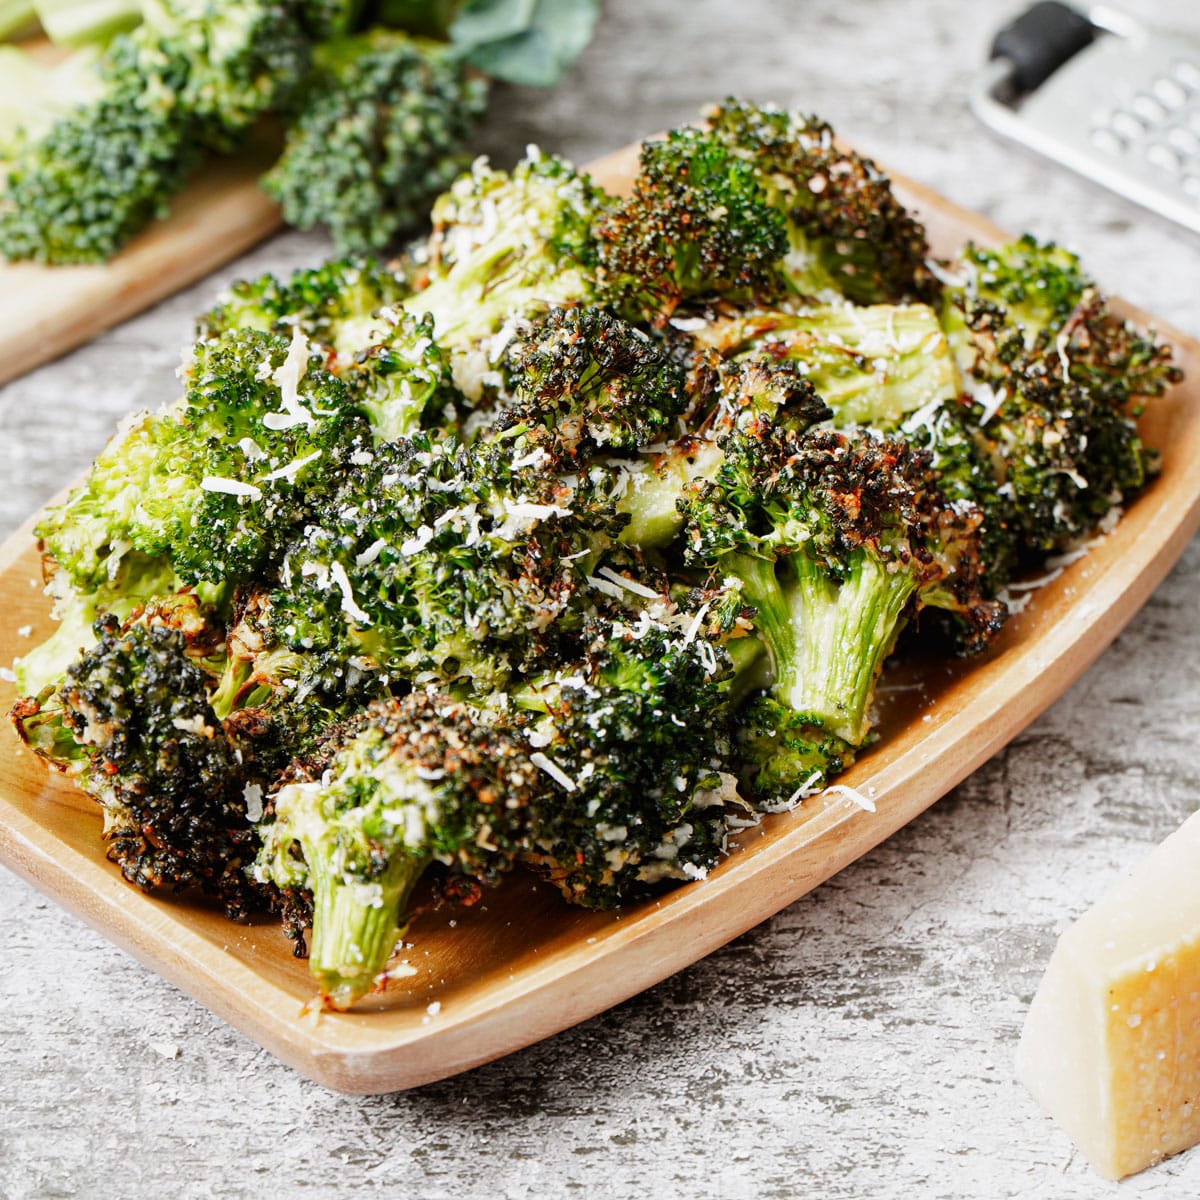 Air fried broccoli parmesan served in a wooden tray.